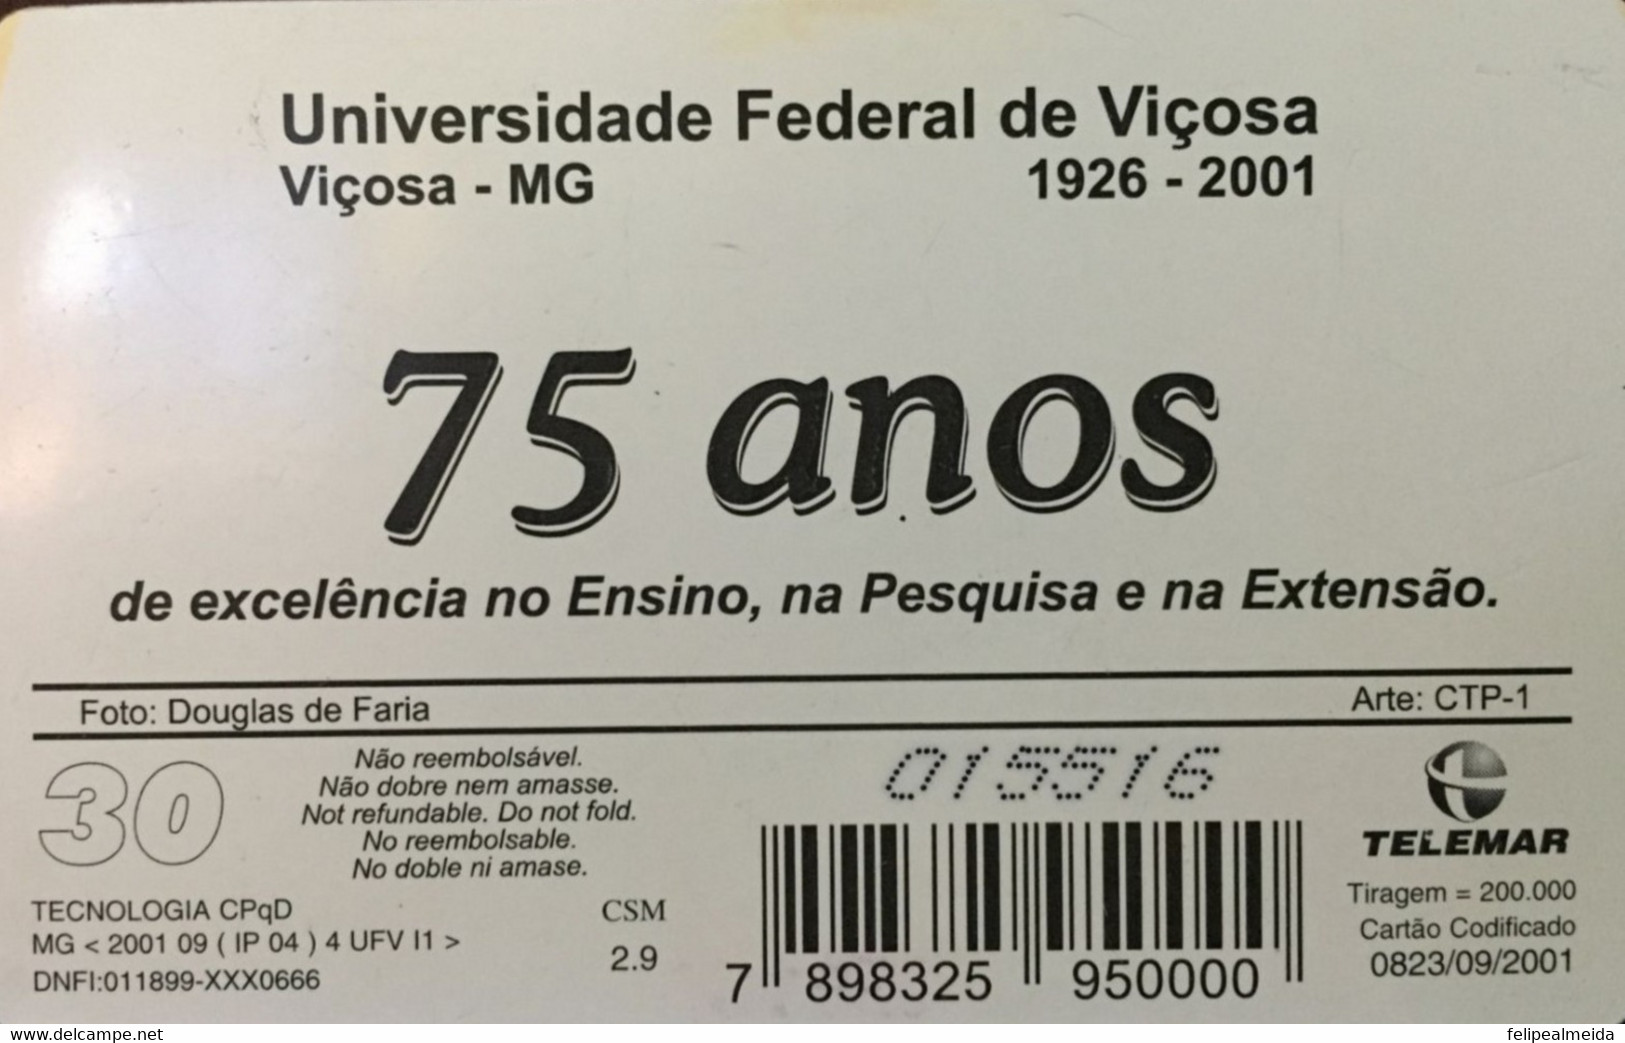 Phone Card Manufactured By Telemar In 2001 - 75 Years Of The Federal University Of Viçosa 1926 To 2001 - Photographer Do - Cultura